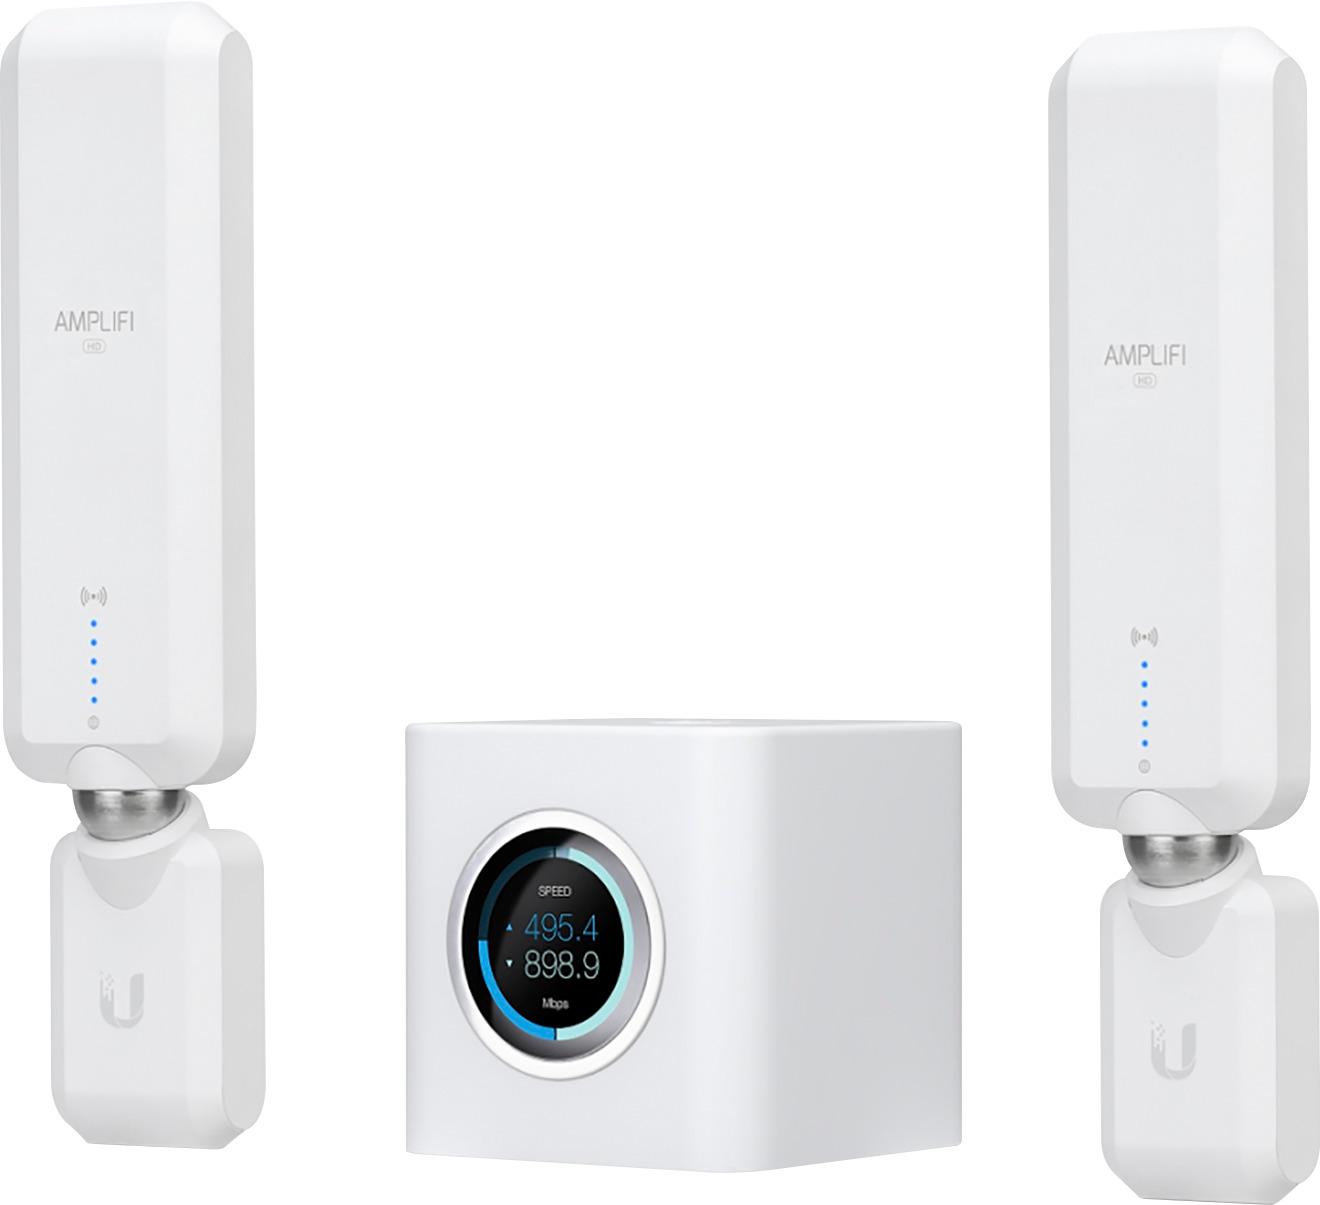 Certain Unifi Plans Now Come With Wi-Fi 6 Certified Router And Mesh System  